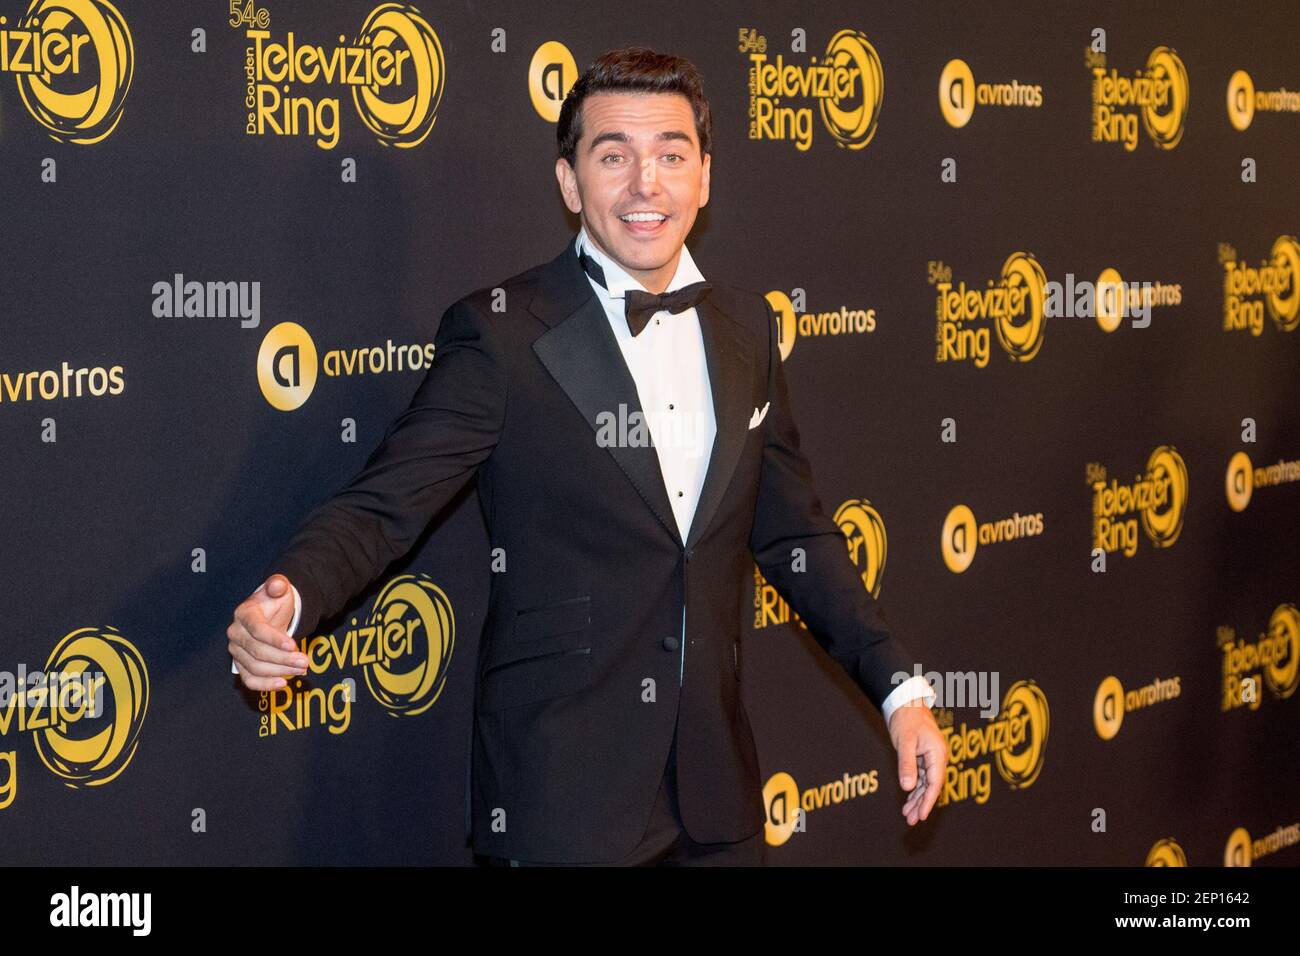 Jan Smit at the Televizier Ring Gala in Amsterdam, The Netherlands (Photo  by DPPA/Sipa USA Stock Photo - Alamy